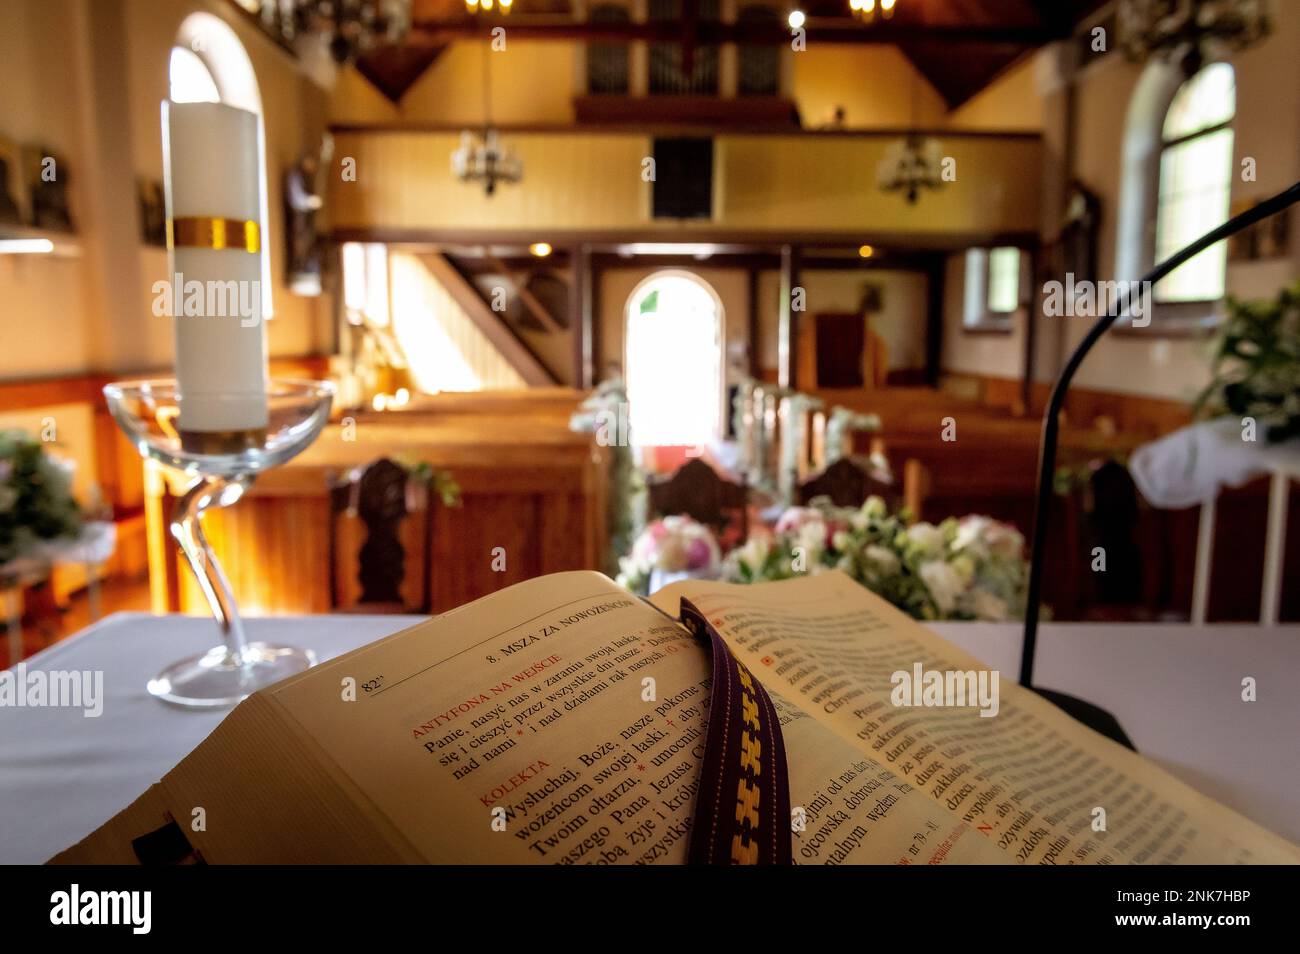 interiors and details in catholic church liturgical book with a church interior blurred in the background Stock Photo